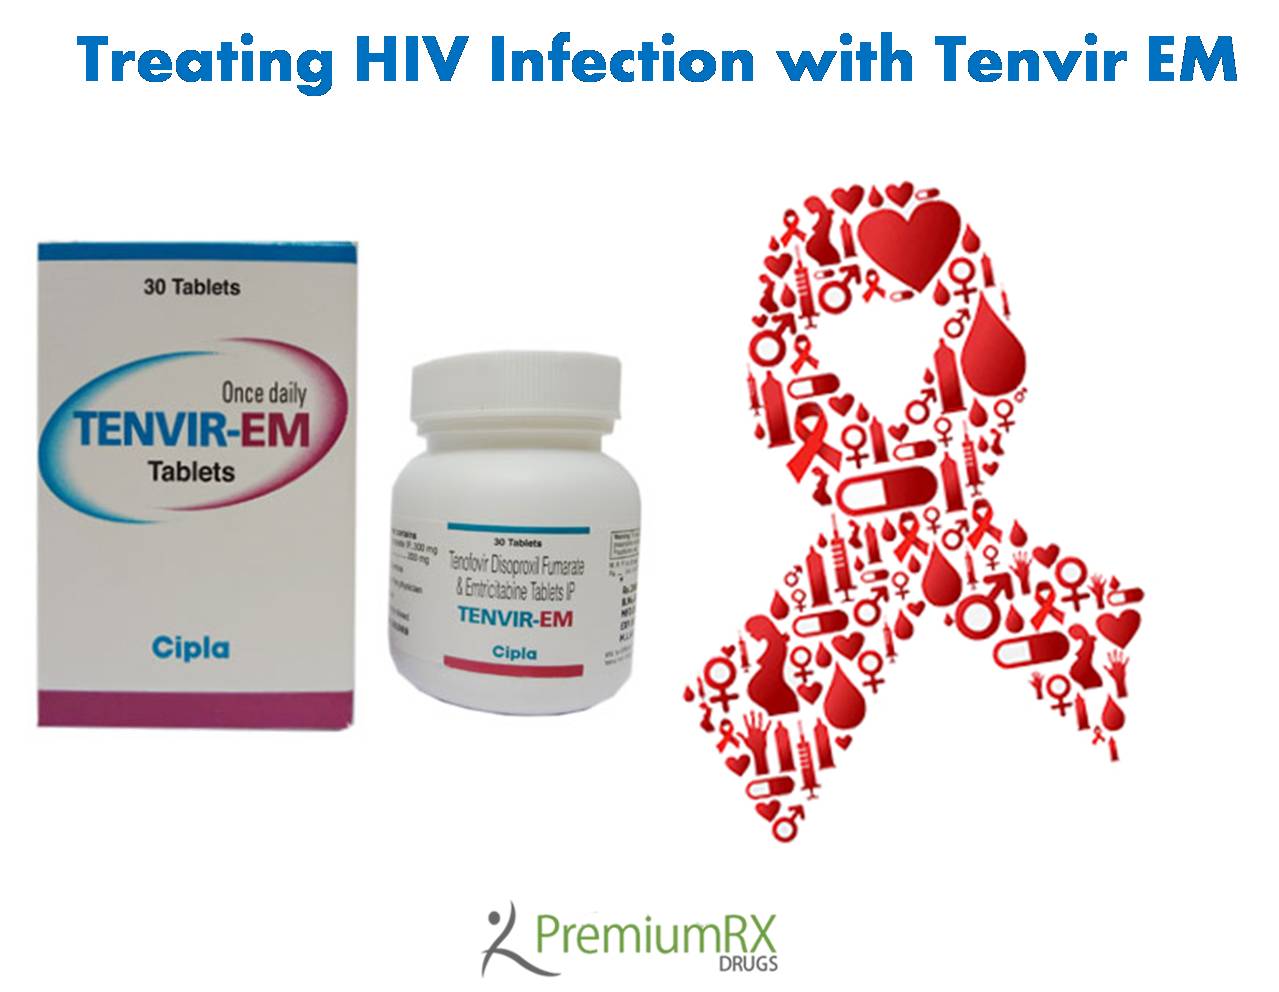 Treating HIV Infection with Tenvir EM